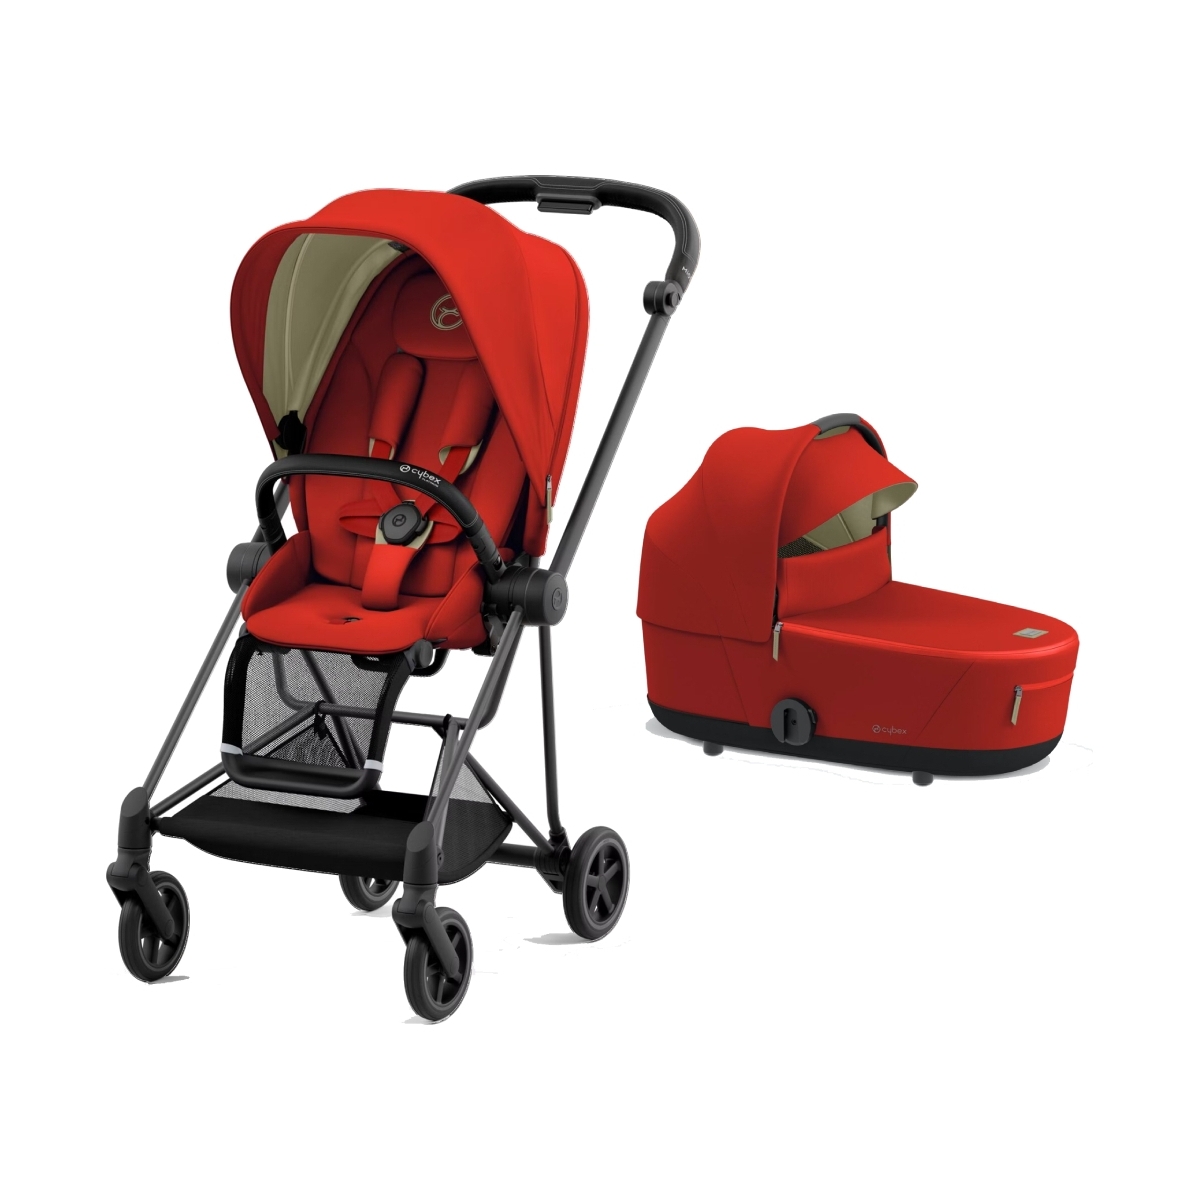 Cybex Mios Black Pushchair with Lux Carry Cot